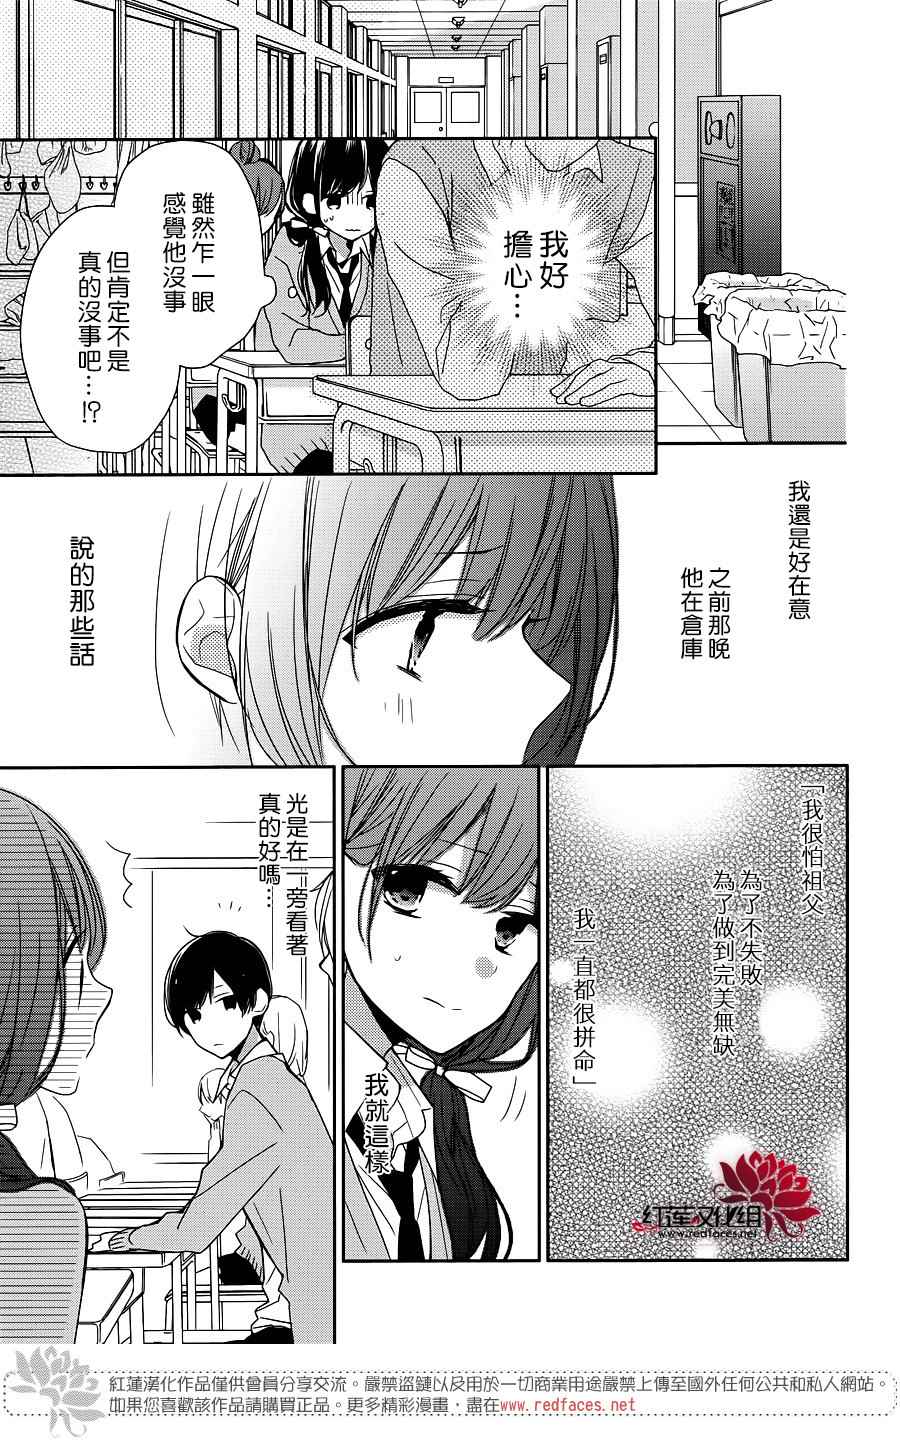 《If given a second chance》漫画 second chance 009话